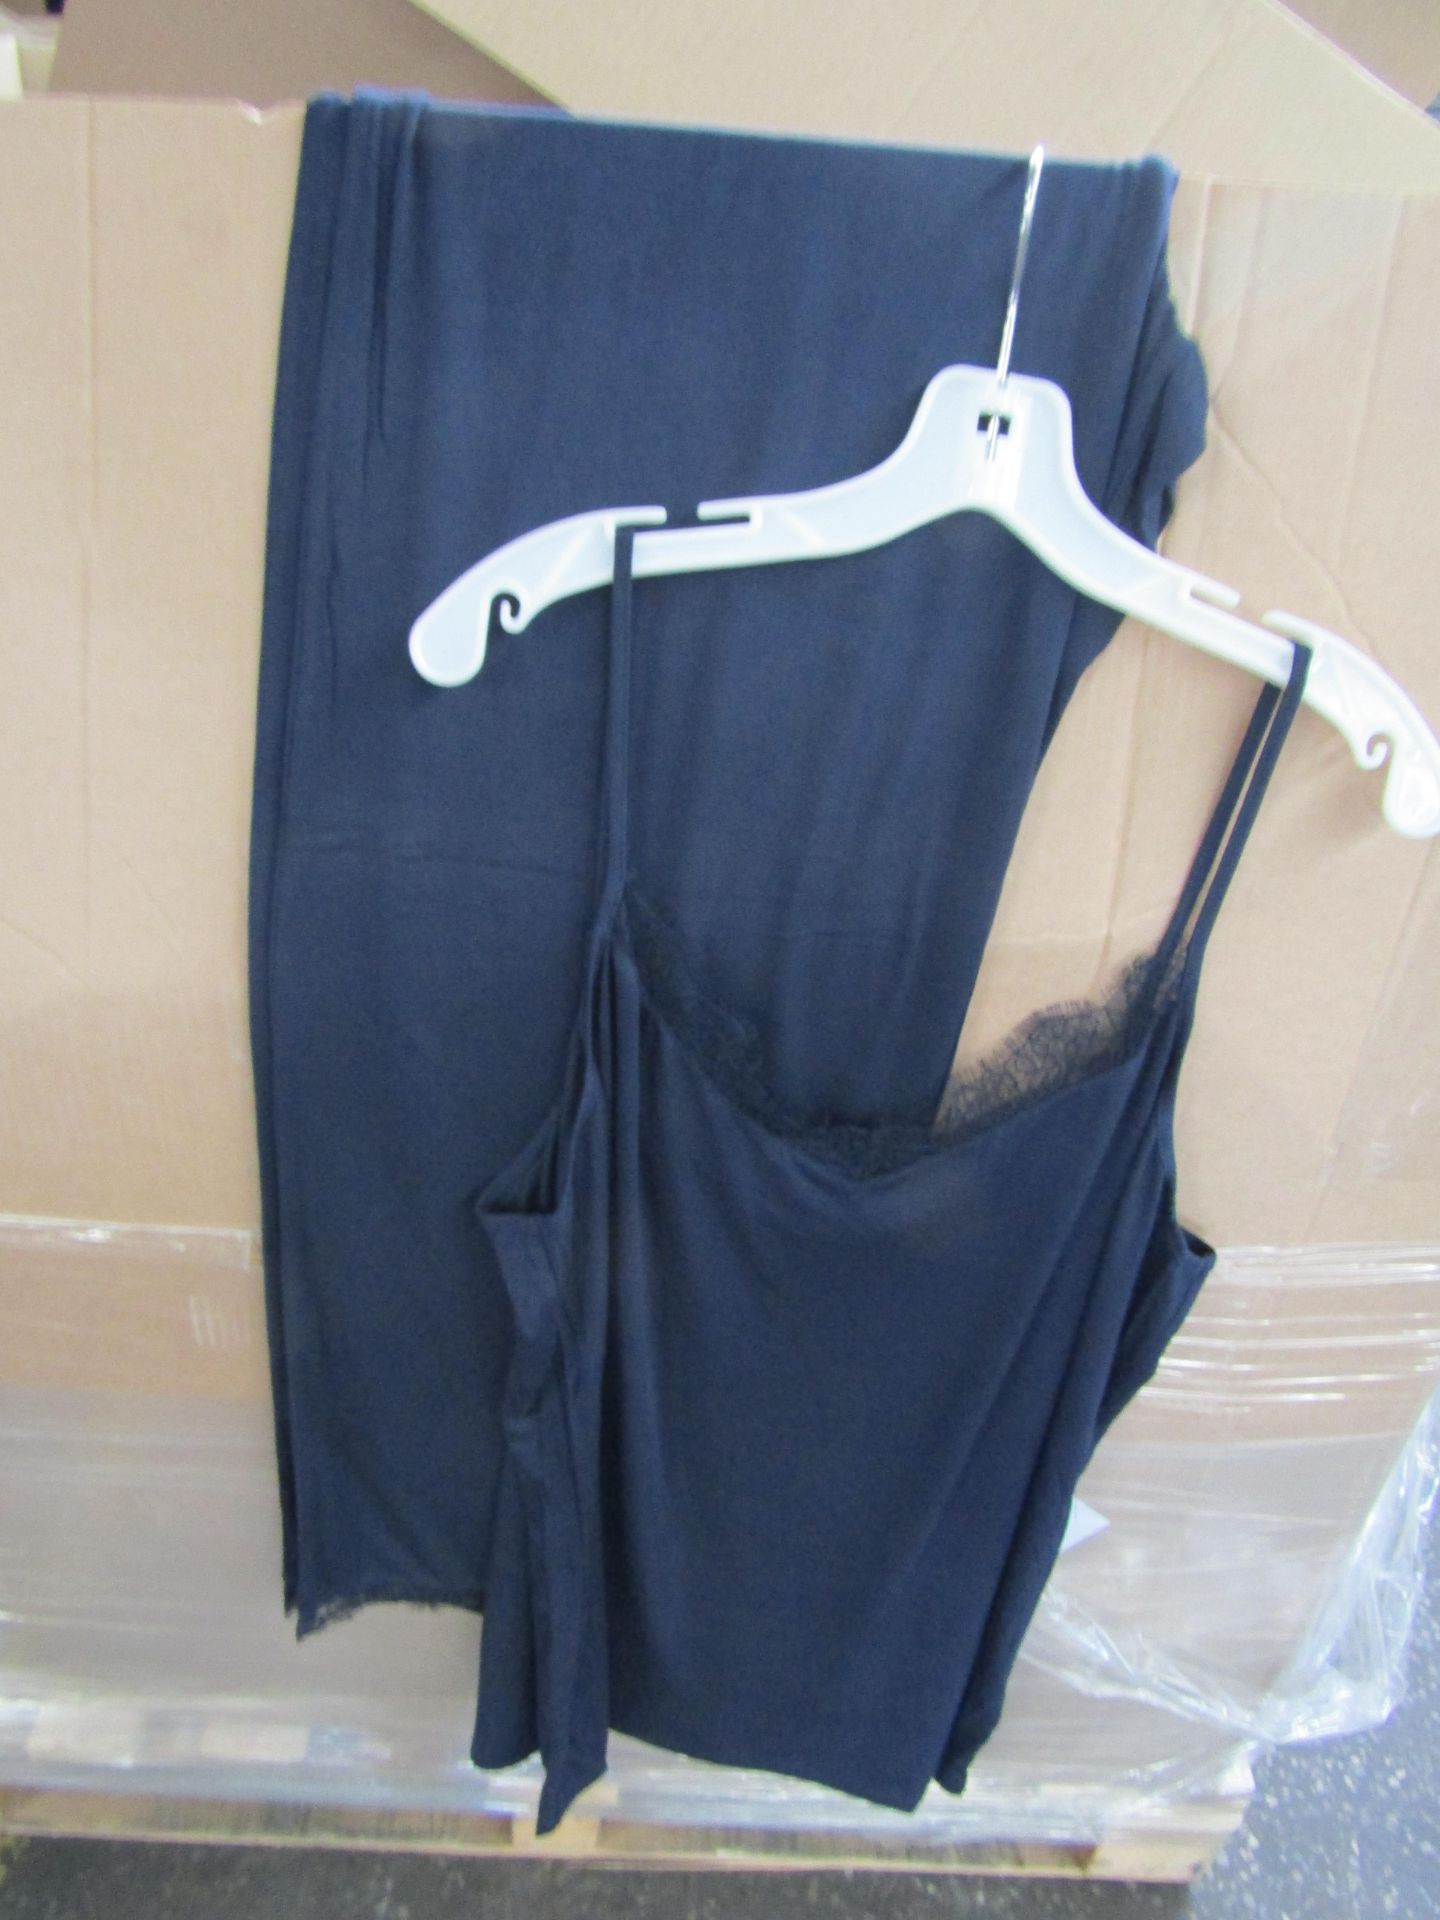 Soak & Sleep Soak & Sleep French Navy Modal Jersey With Lace X-Large Cami Set RRP 24About the